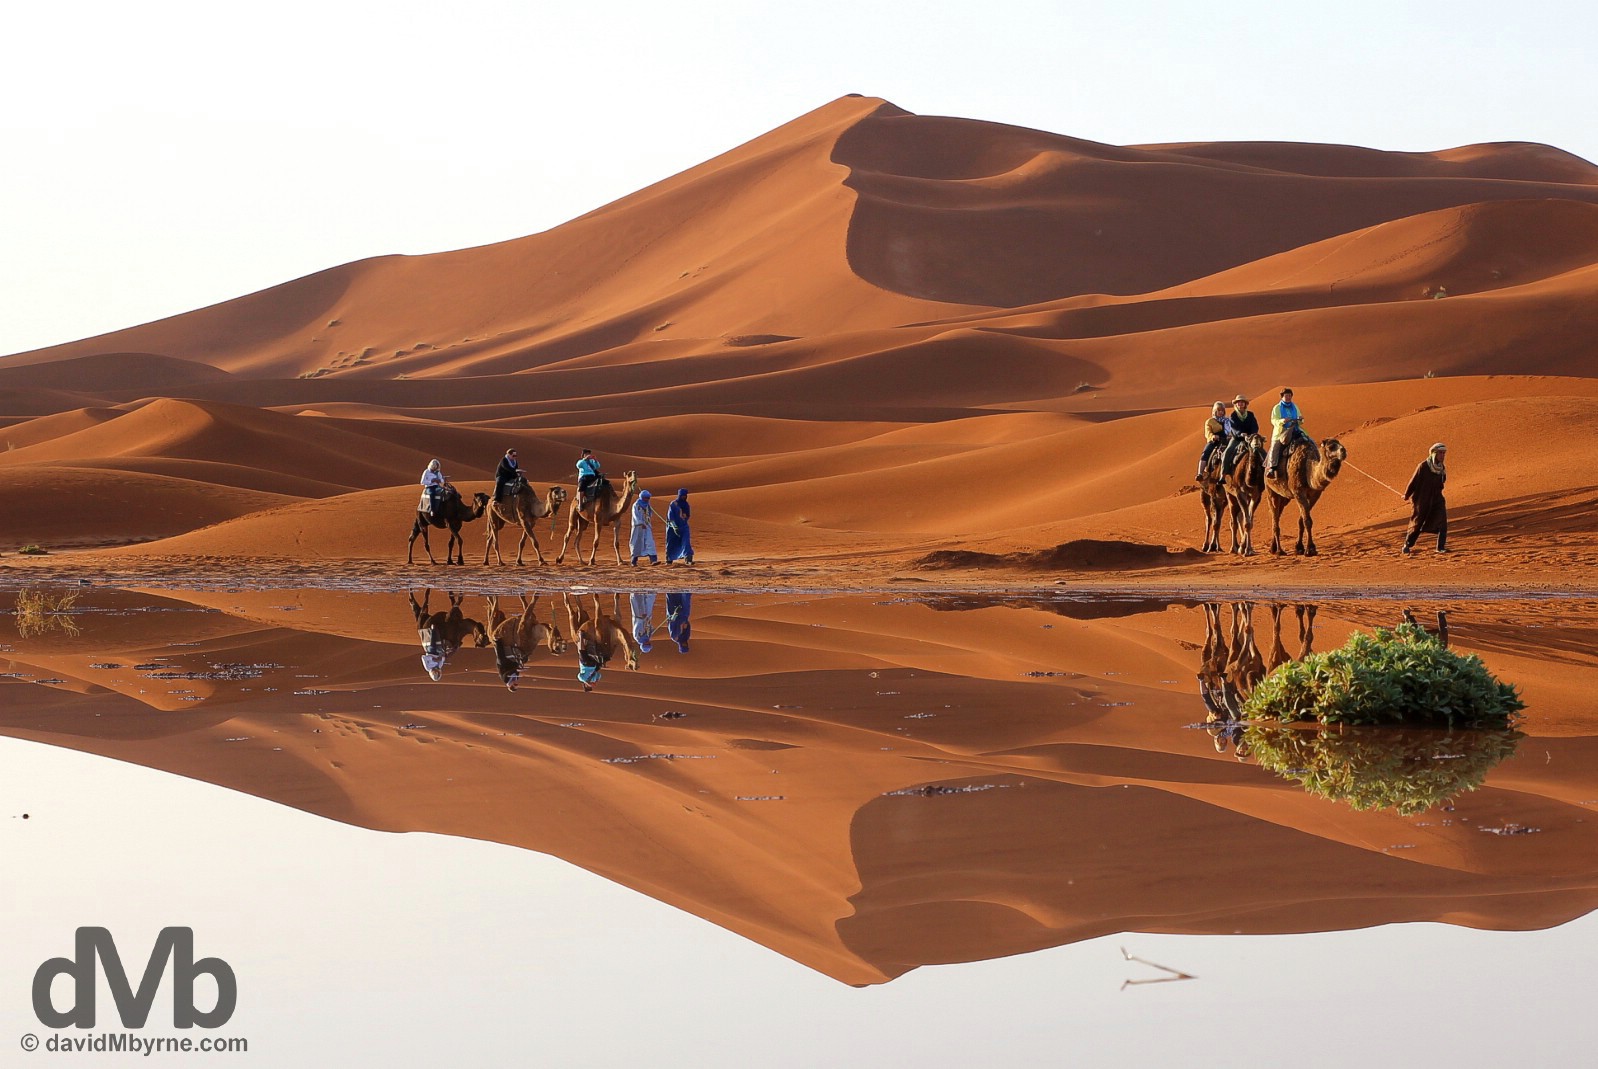 A sunrise camel train reflection among the dunes of Erg Chebbi, southeastern Morocco. May 19, 2014.